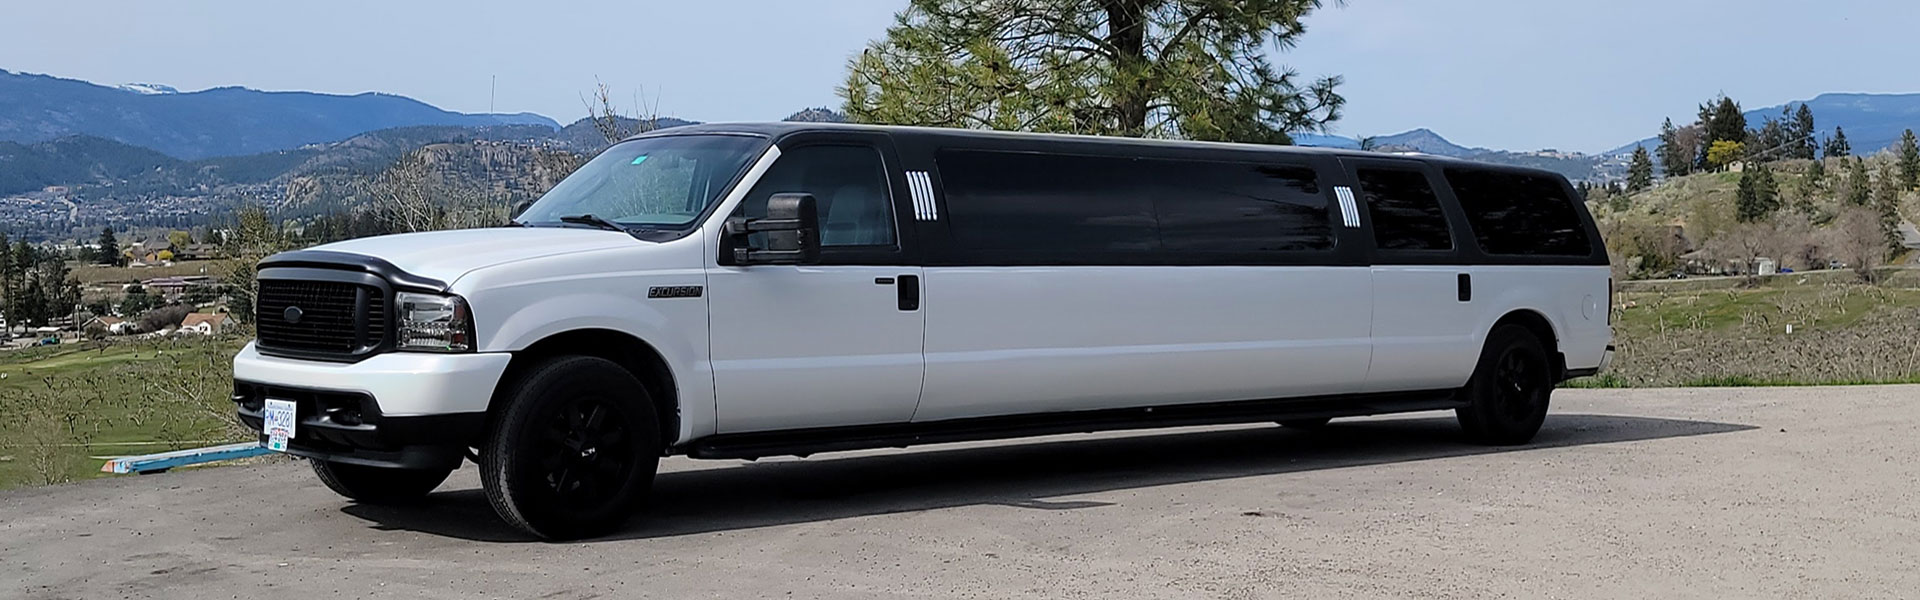 Okanagan Limousine will provide exceptional service at affordable pricing.